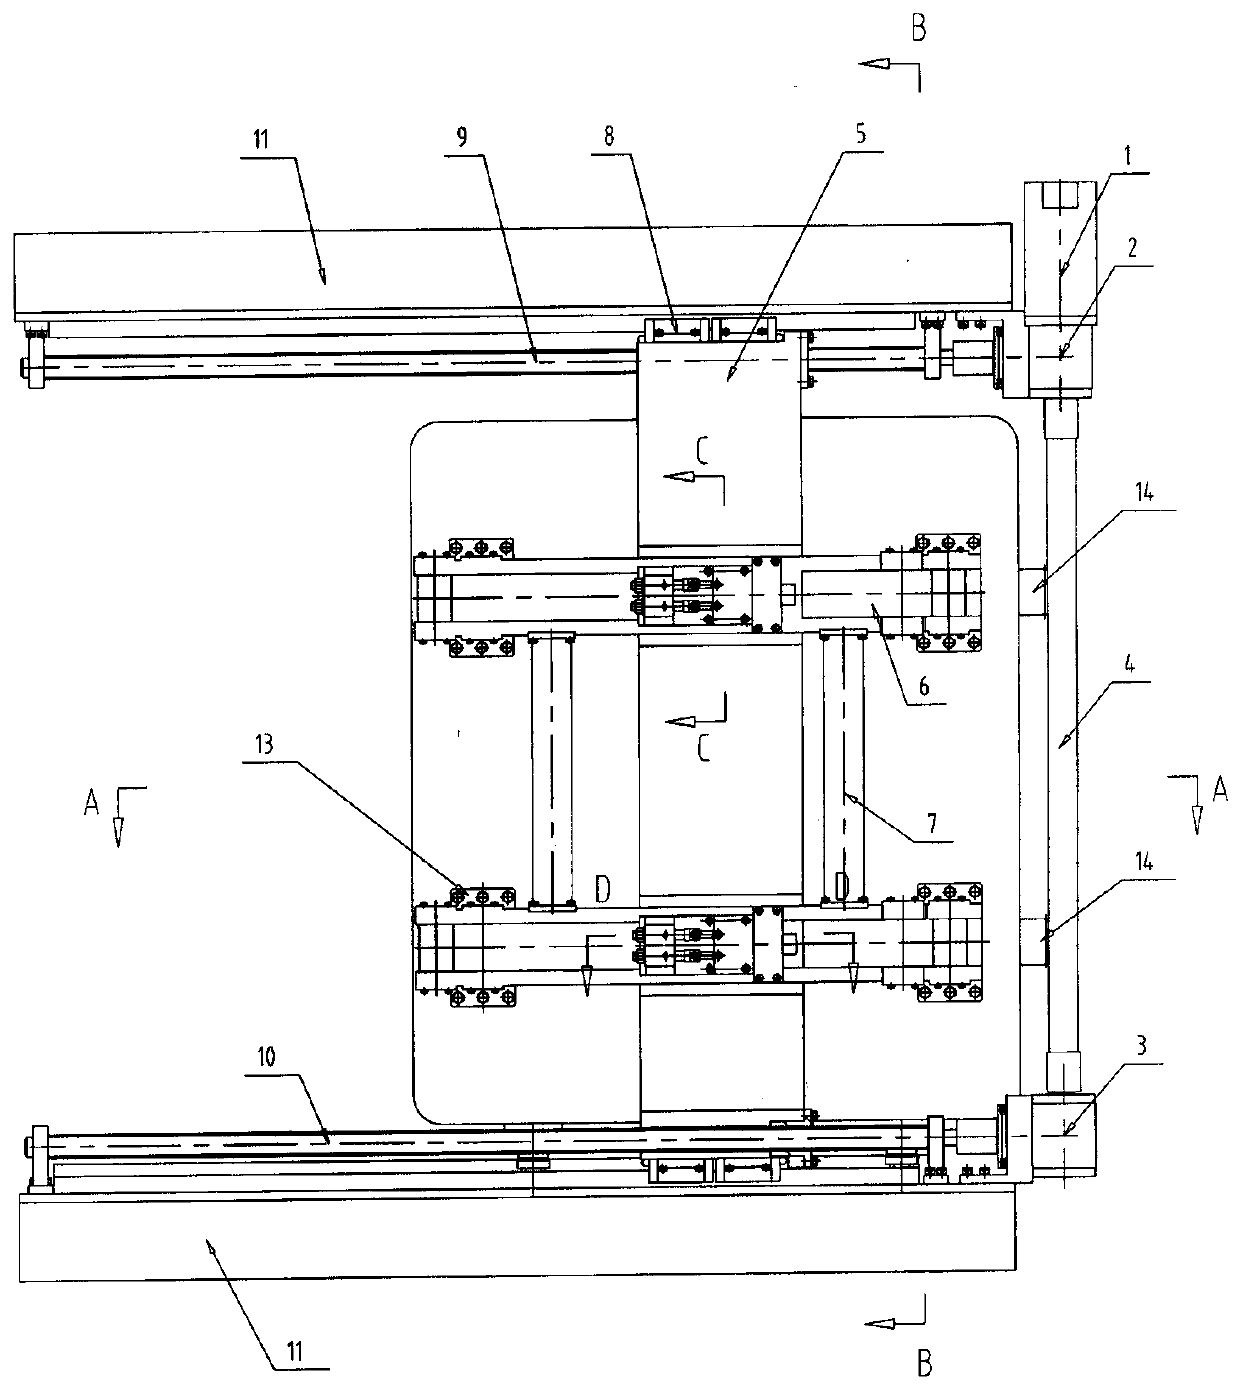 Mechanism capable of realizing automatic door opening and closing and applying pressing force